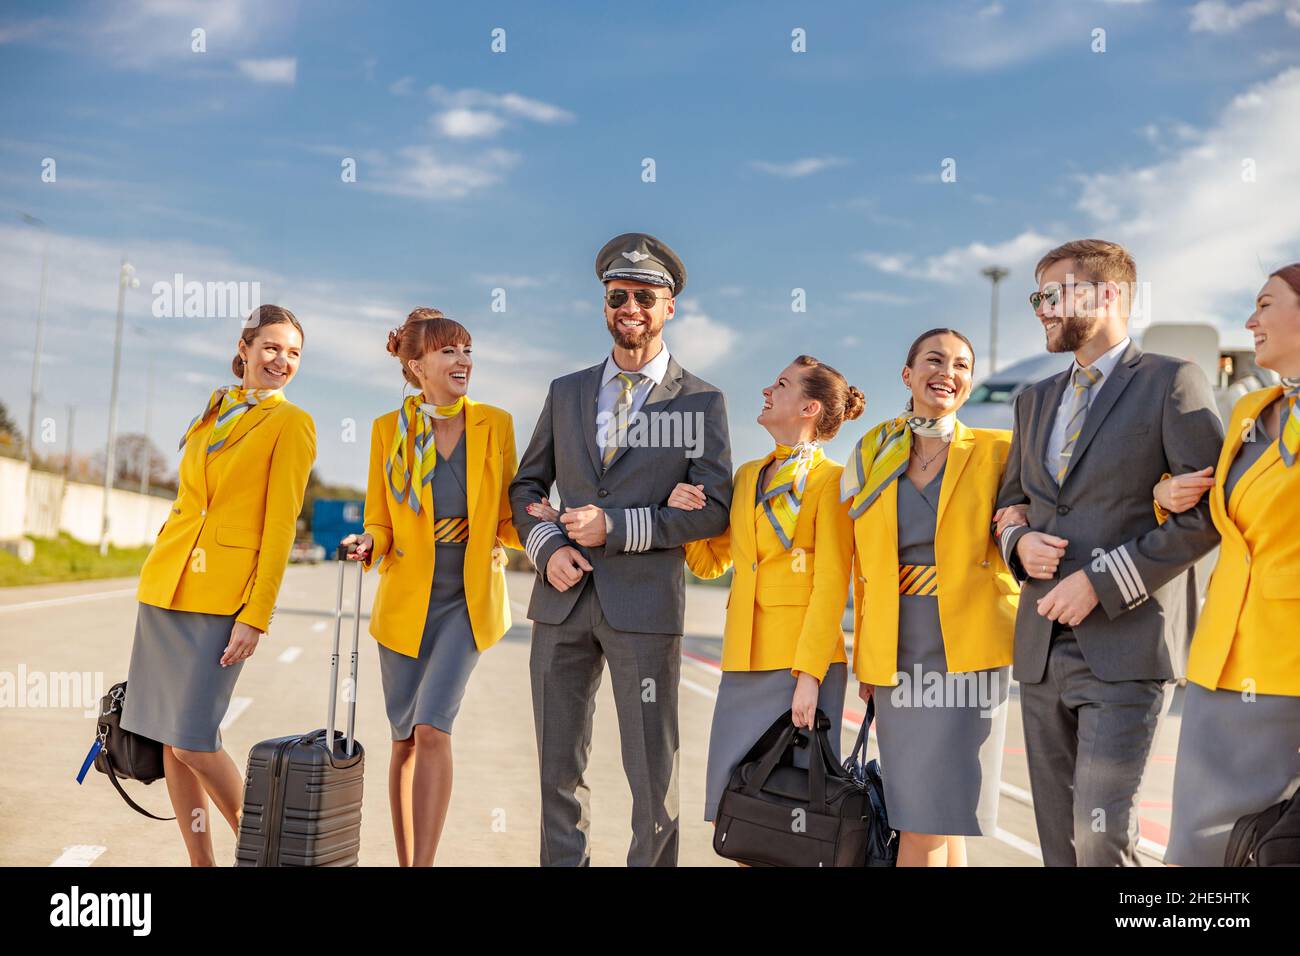 Joyful women stewardesses holding travel bags and smiling while standing at airport with male pilots Stock Photo